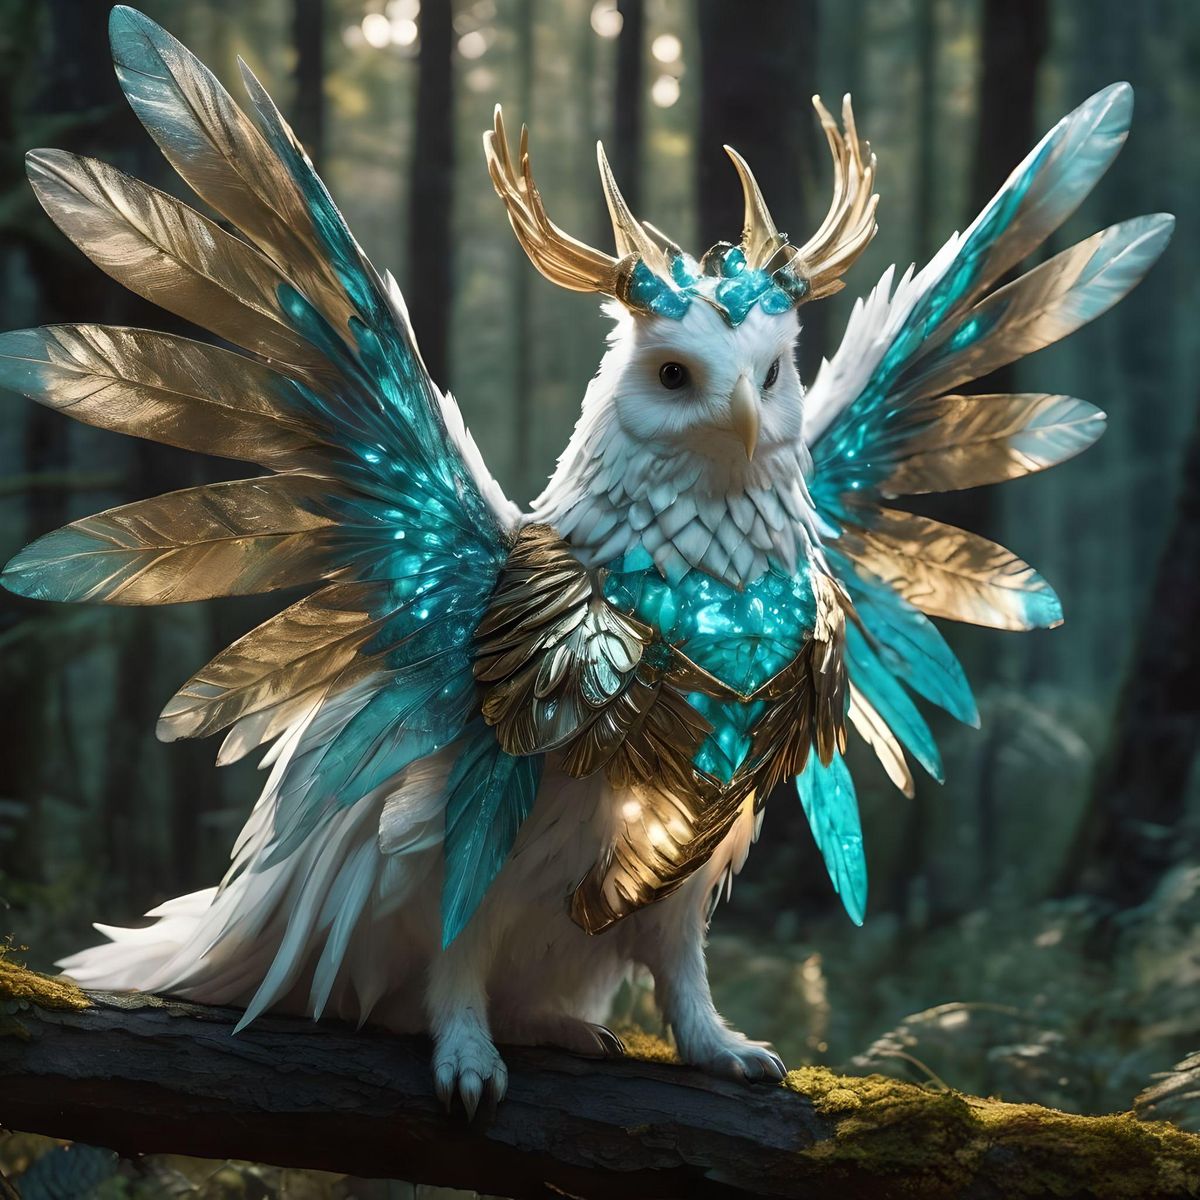 fantastical mythical heavy fluffy white forest animal with glowing large wings and wearing gold chest armor, large wings are jeweled gold and turquoise, mystical dark old forest fireflies 